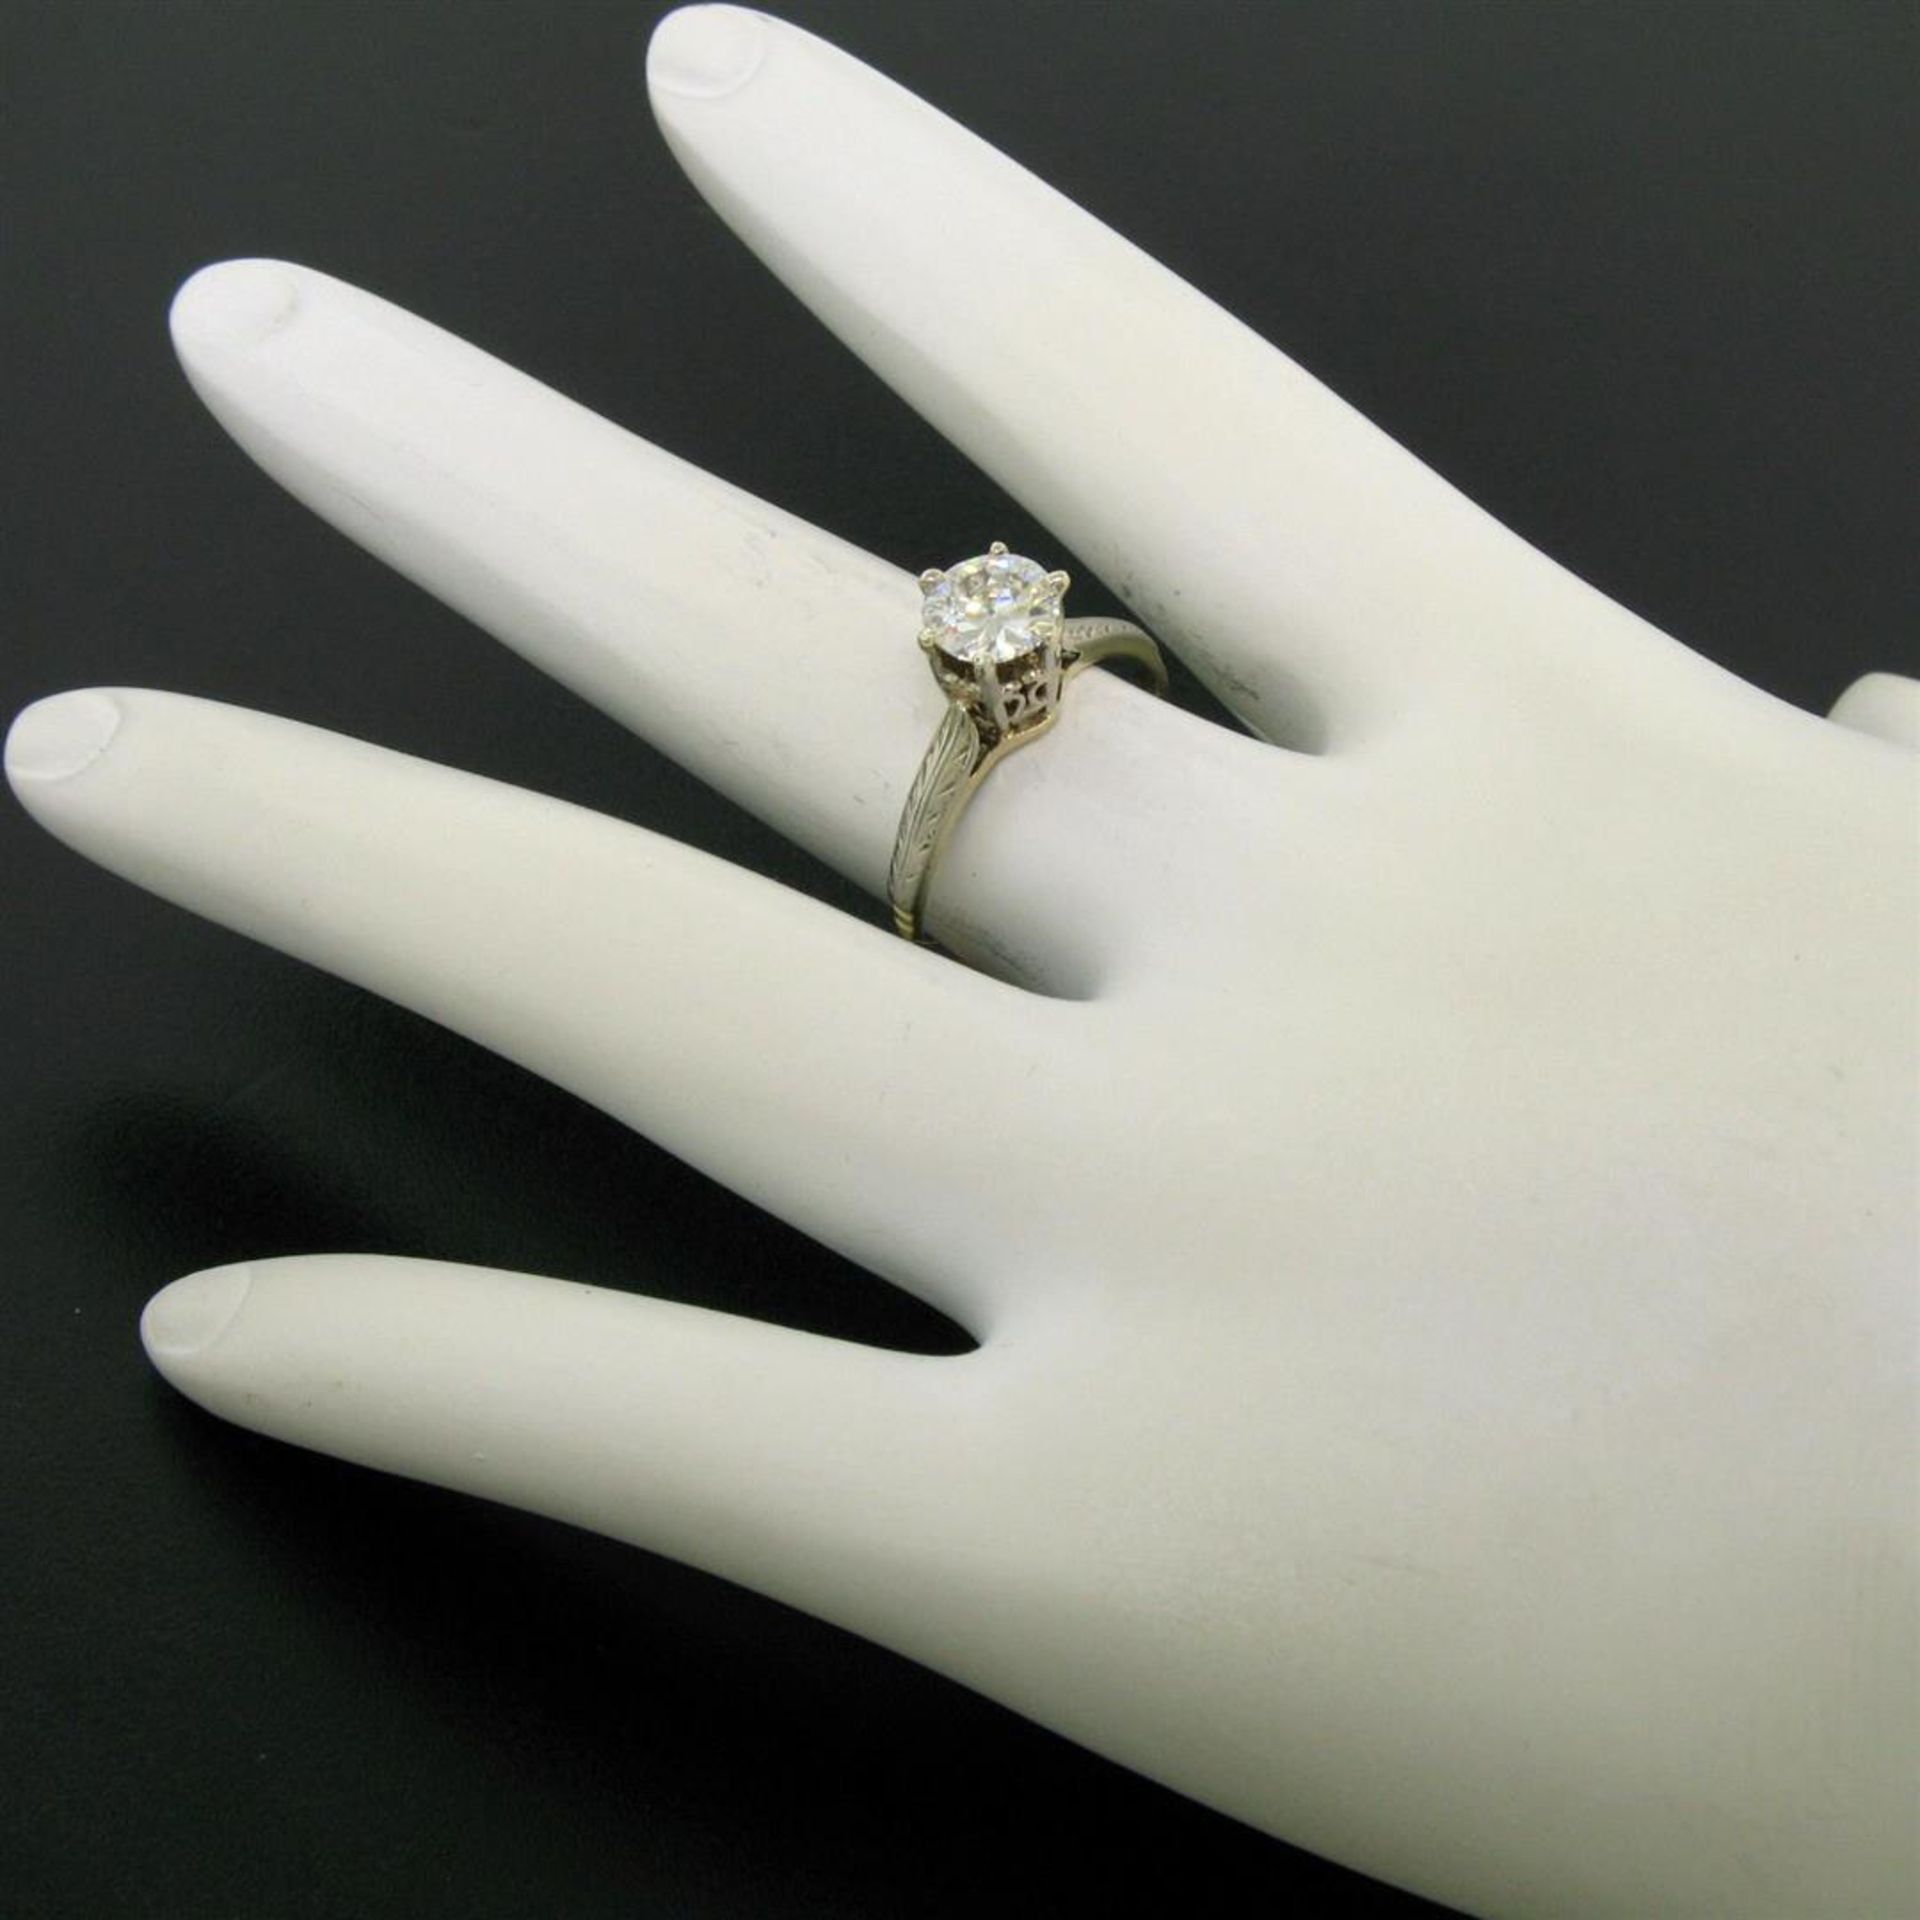 Etched 14k TT Gold .80 ct European Cut Diamond Solitaire Engagement Ring - Image 3 of 7